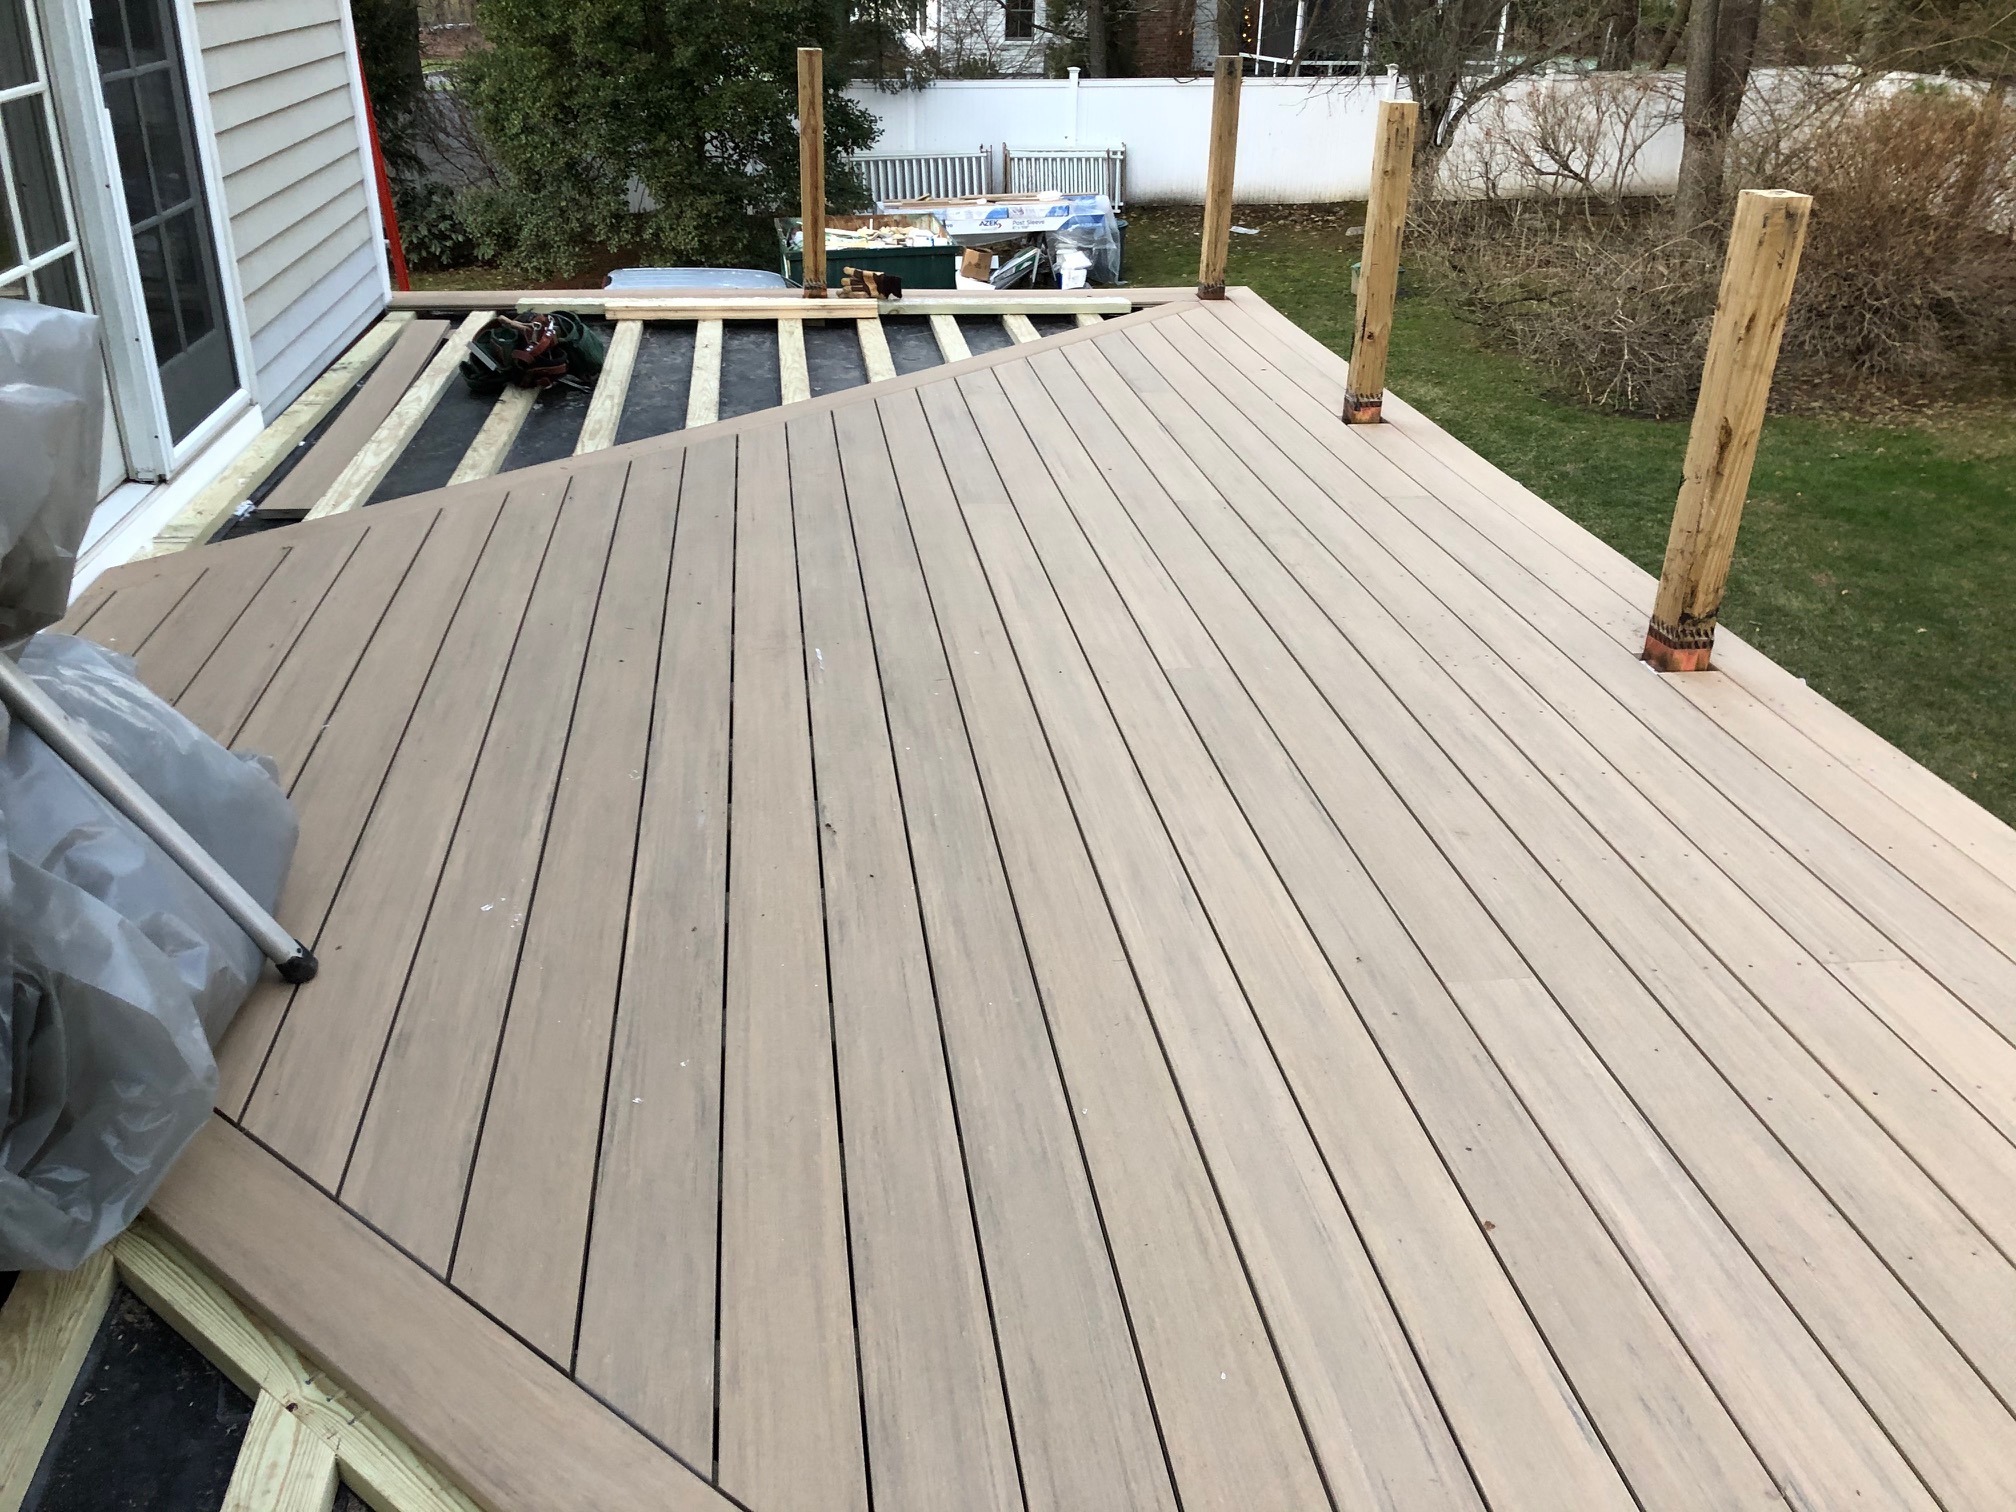 Flat Roof & Deck Installation Project in Darien, CT - Kling Brothers ...